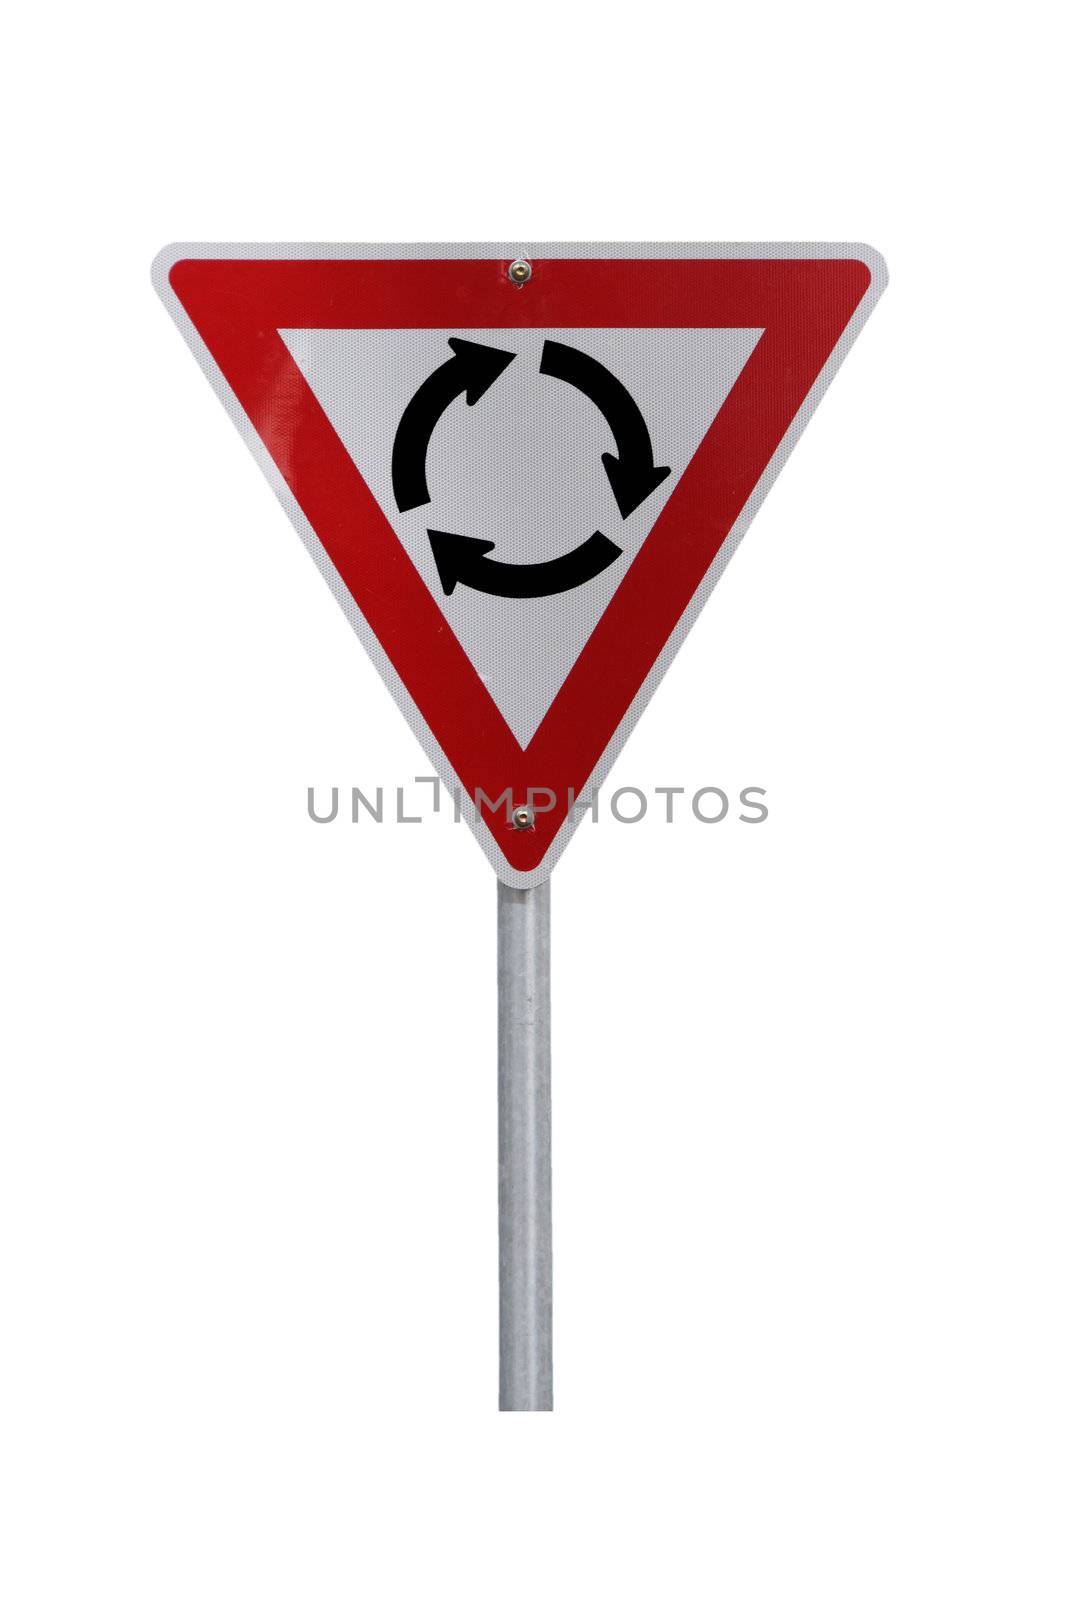 Isolated Roundabout Warning Sign - Current Australian Road Sign  by Cloudia